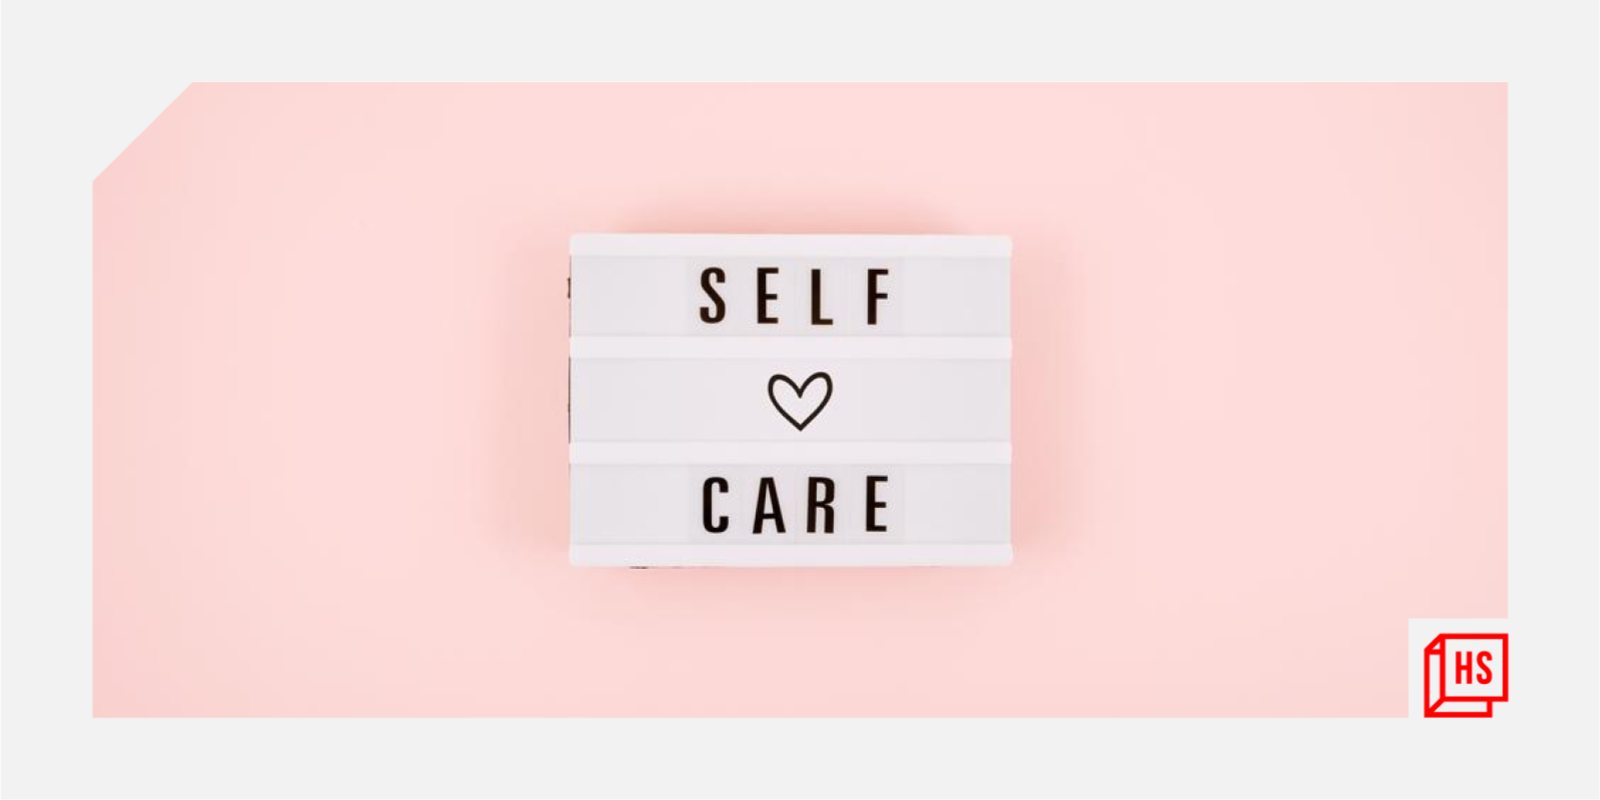 [Women’s Day] Why is it important for women to take self-care break?

